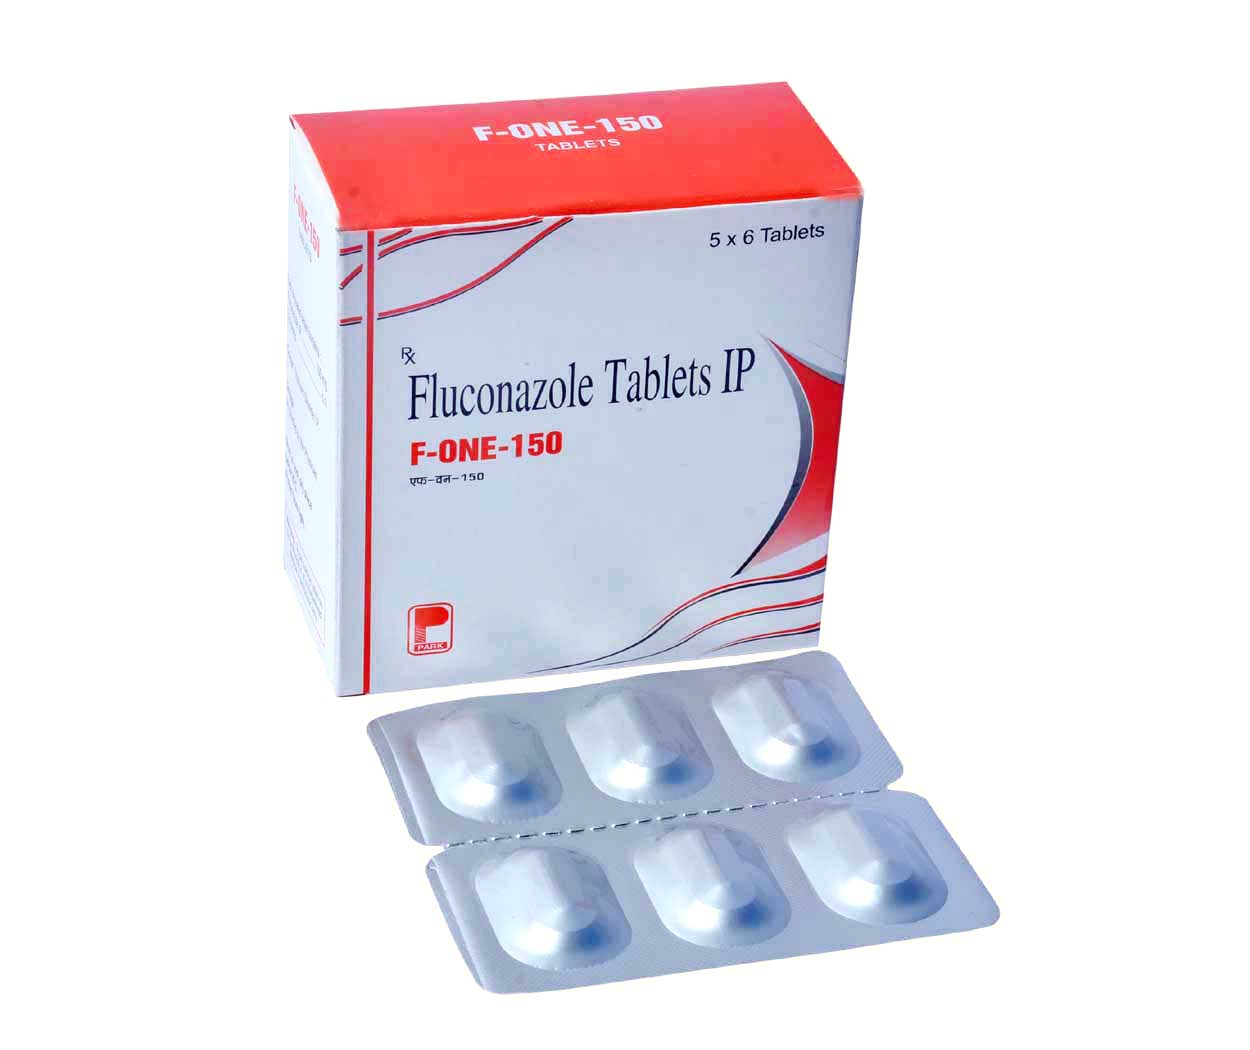 Product Name: F ONE 150, Compositions of F ONE 150 are Fluconazole Tablets IP - Park Pharmaceuticals